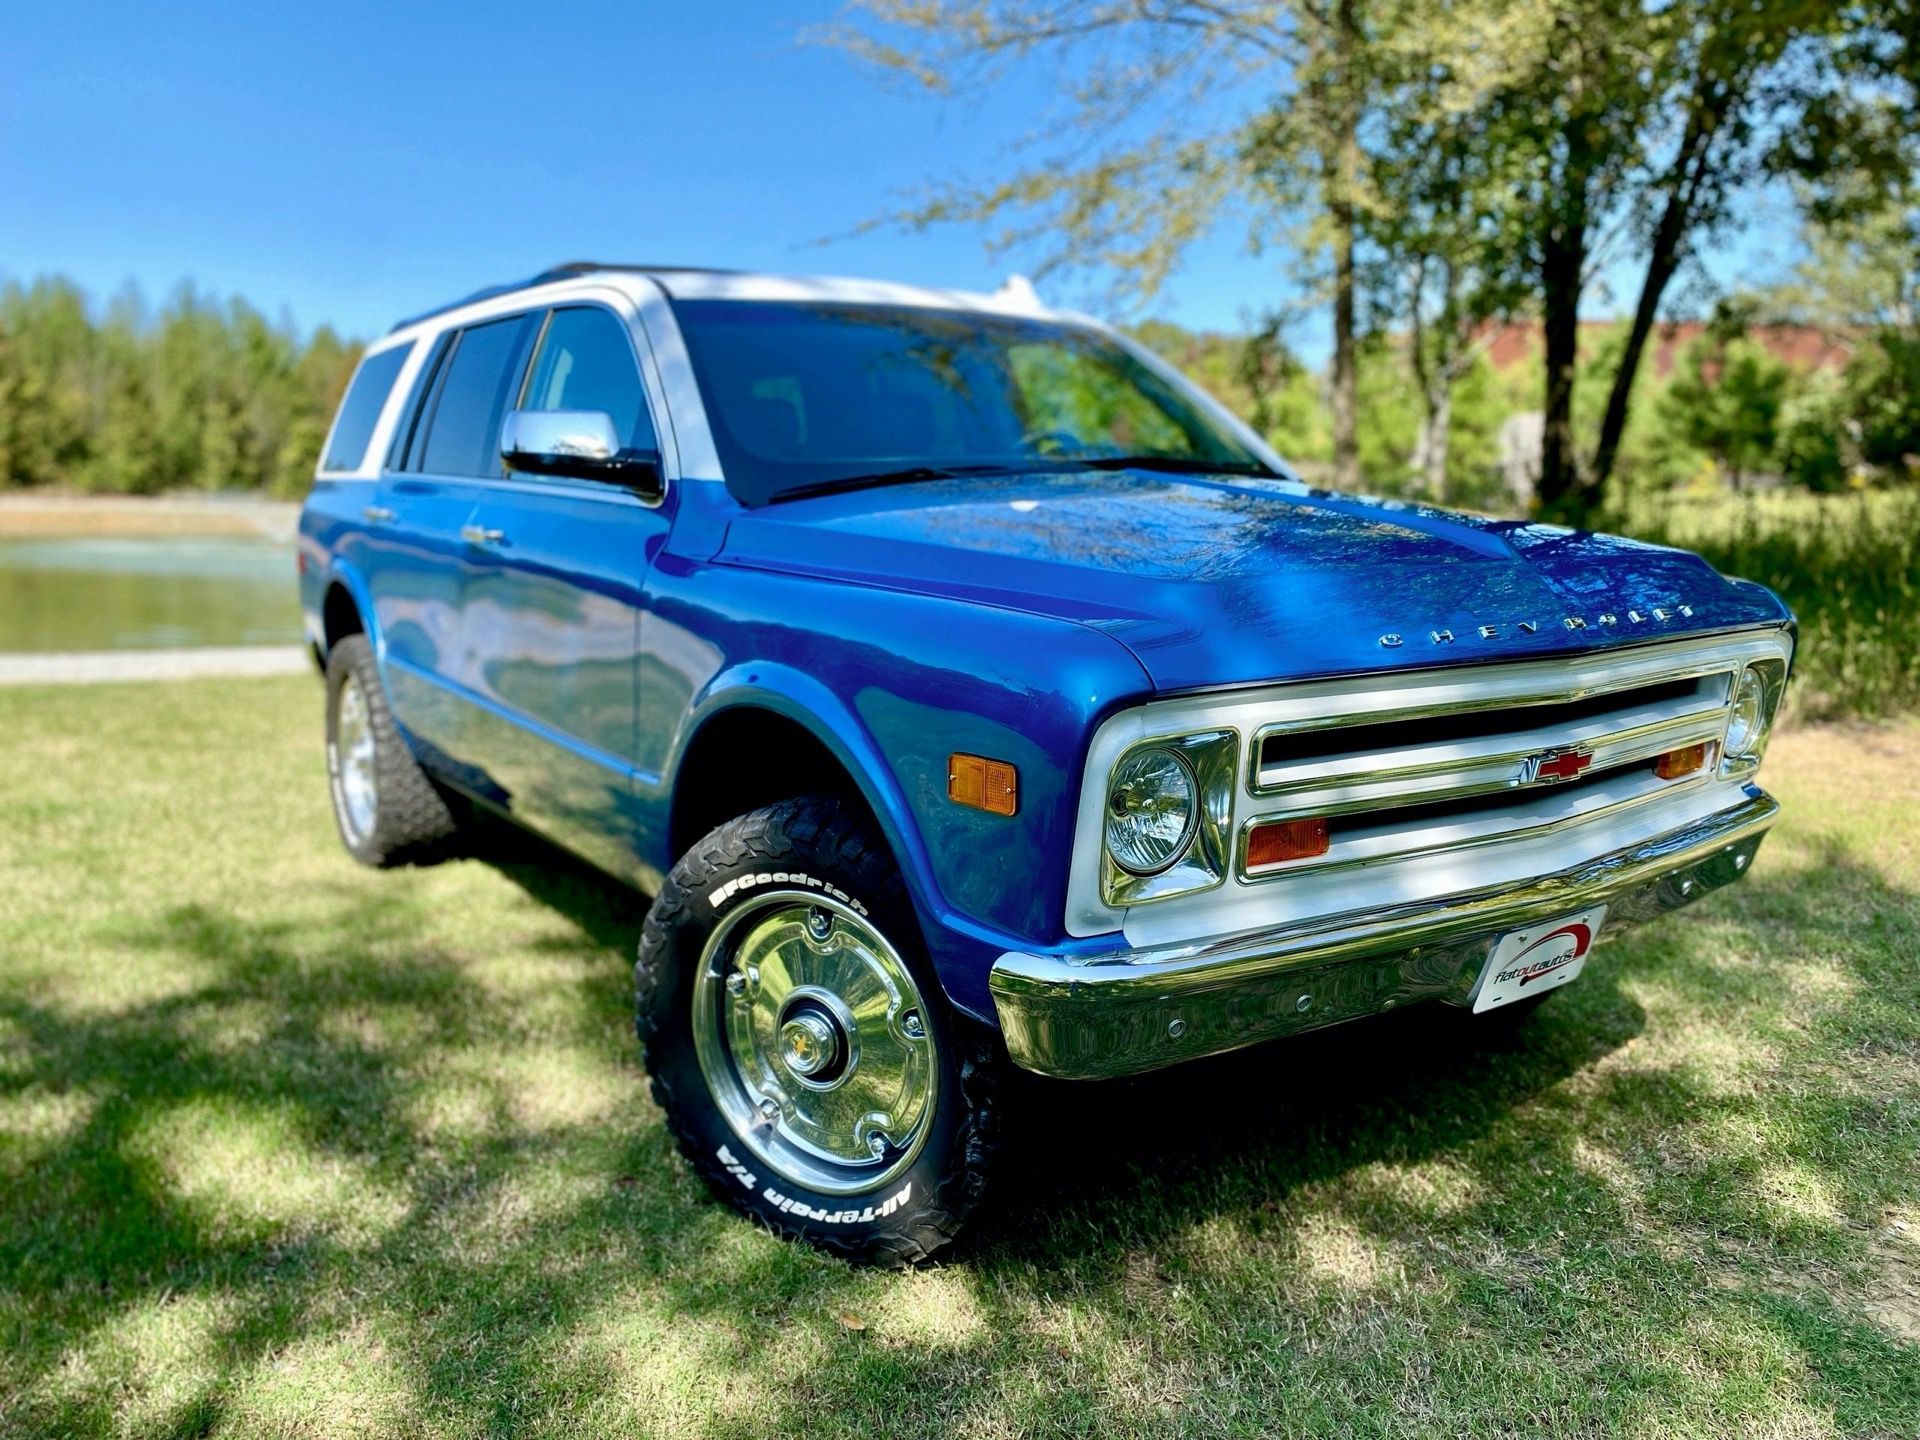 This Modern Day Chevy K5 Blazer Will Cost You $000 And A Tahoe, But It's Fit For Royalty